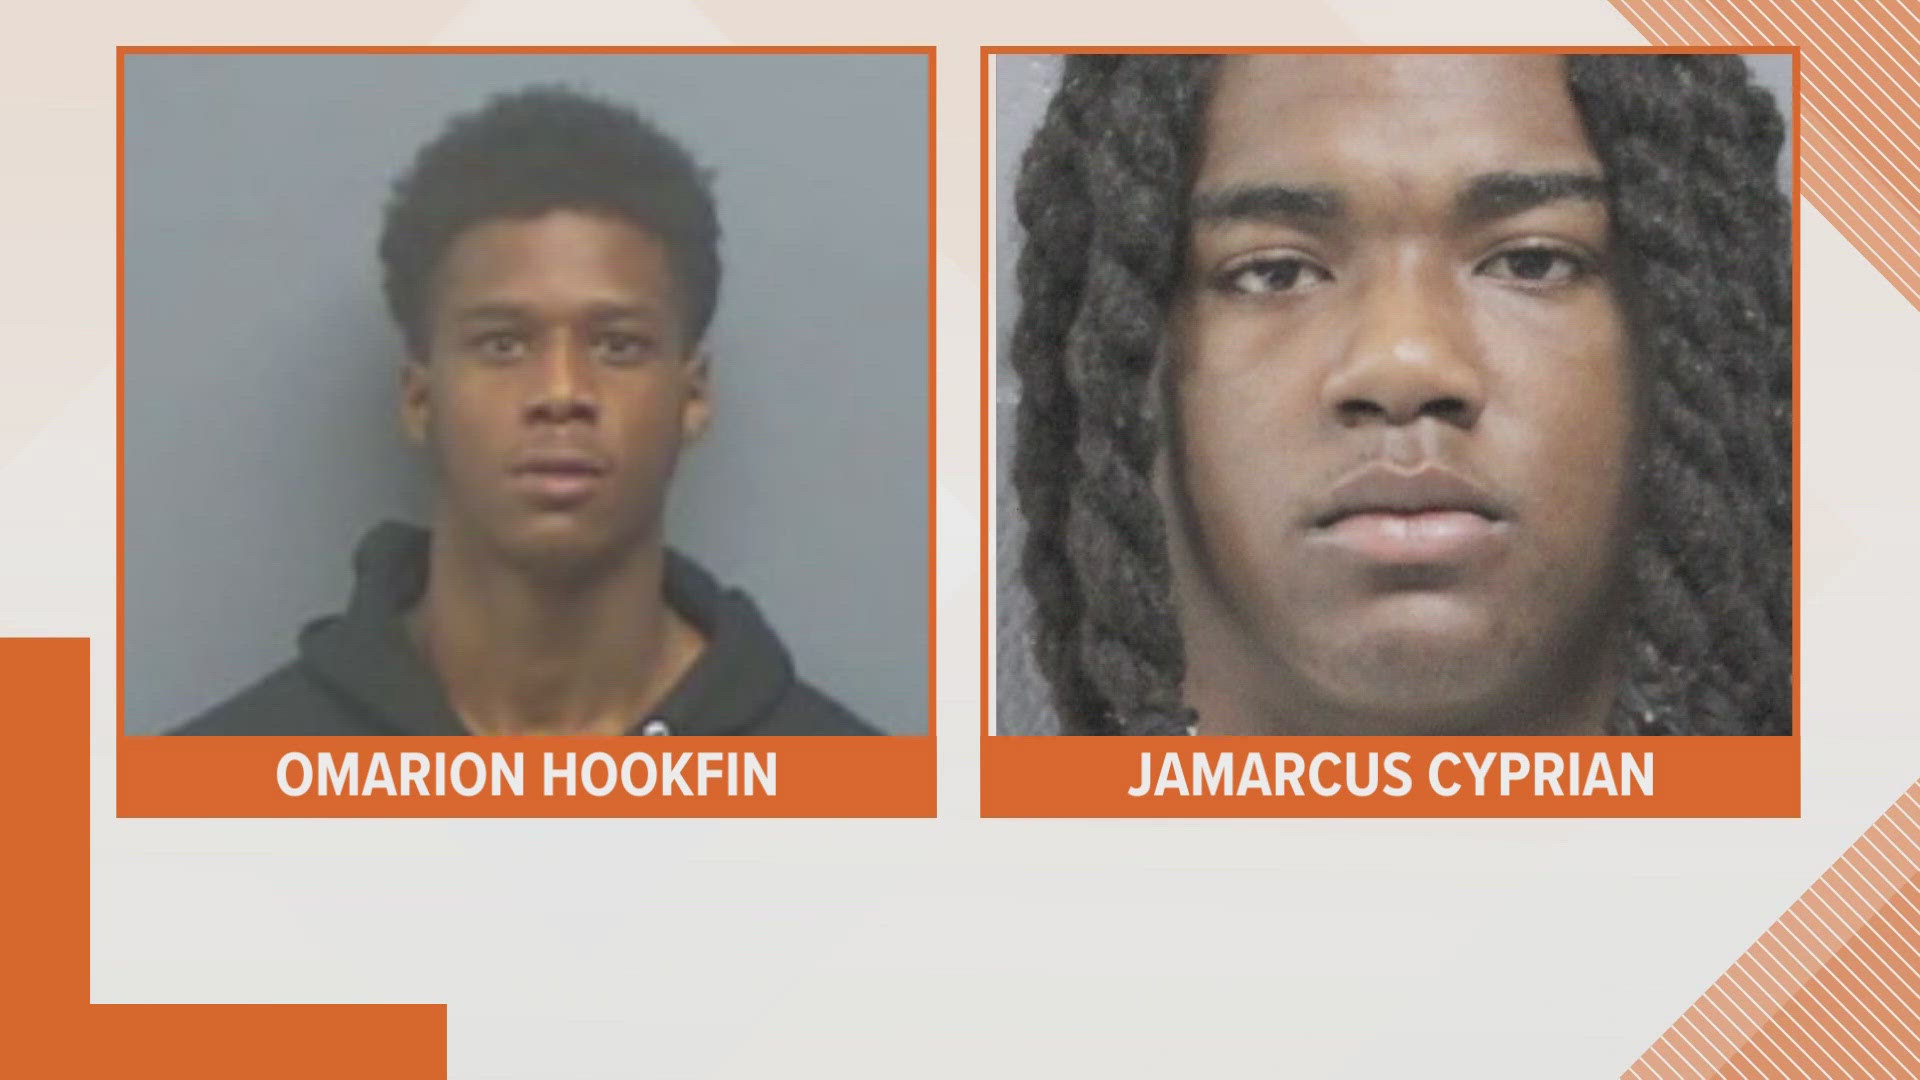 After an escape during the Summer of 2014, Sheriff Daniel Edwards raised concerns then. Inmates, Omarion Hookfin, 19, and Jamarcus Cyprian, 20, are still on the run.